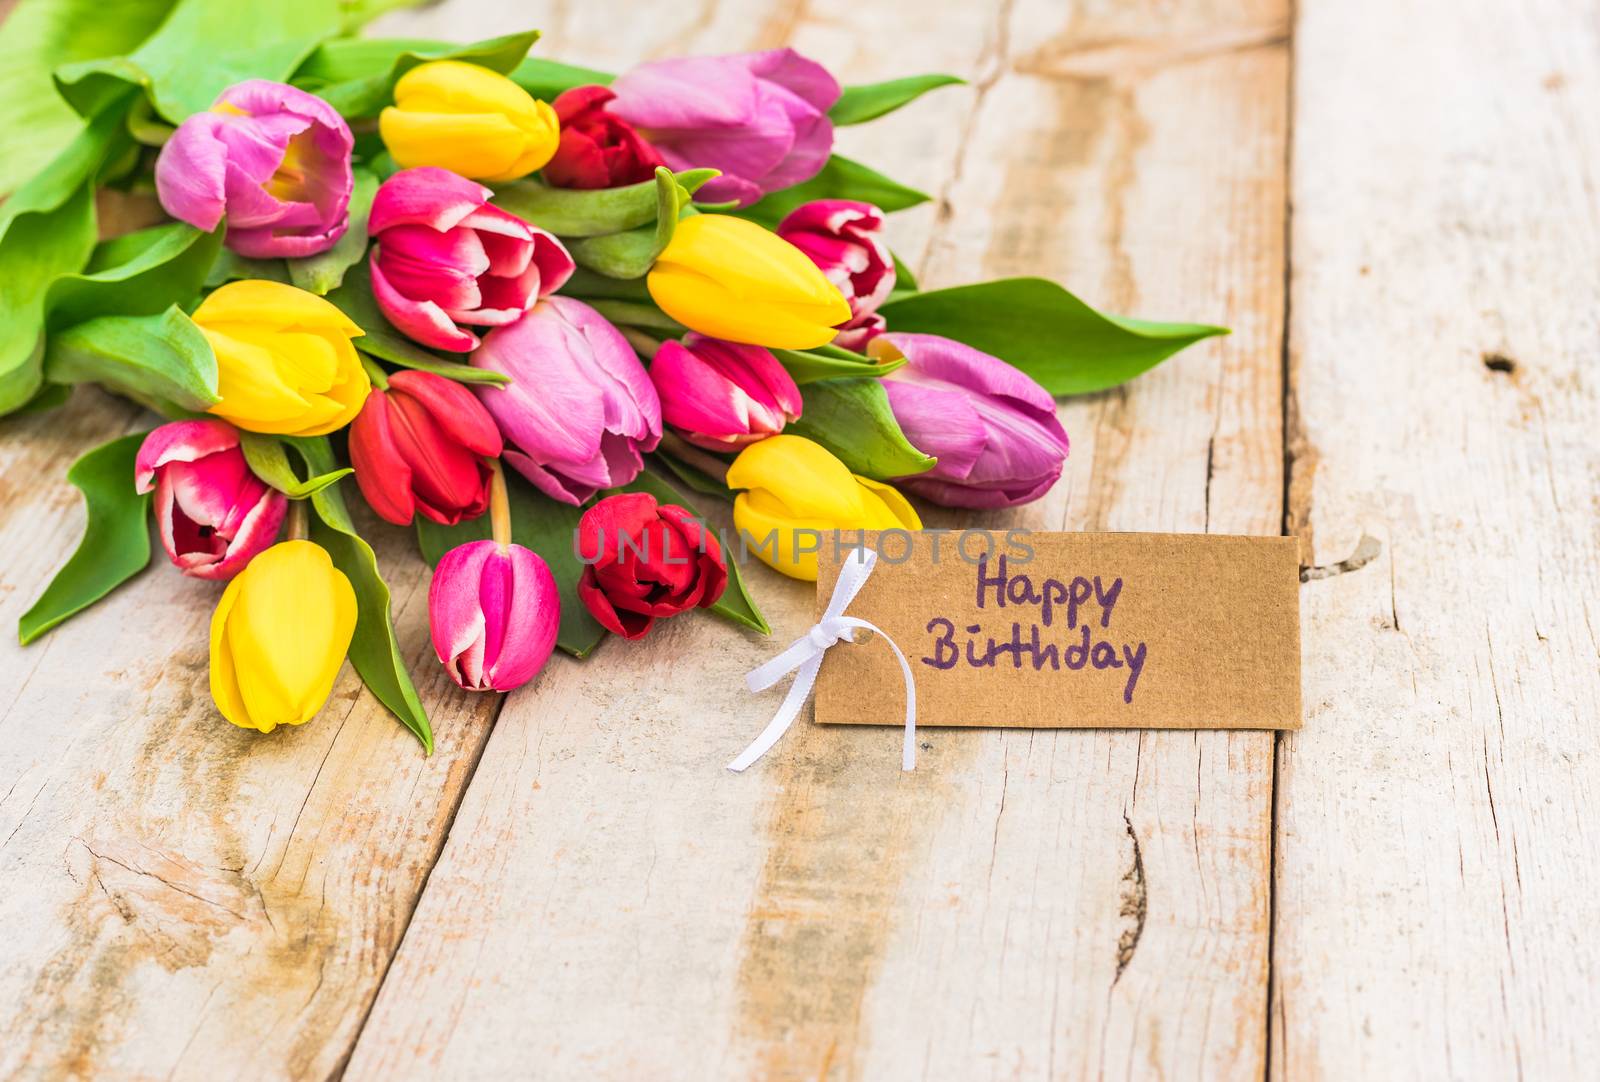 Beautiful bunch of flowers with Happy Birthday card on wooden table